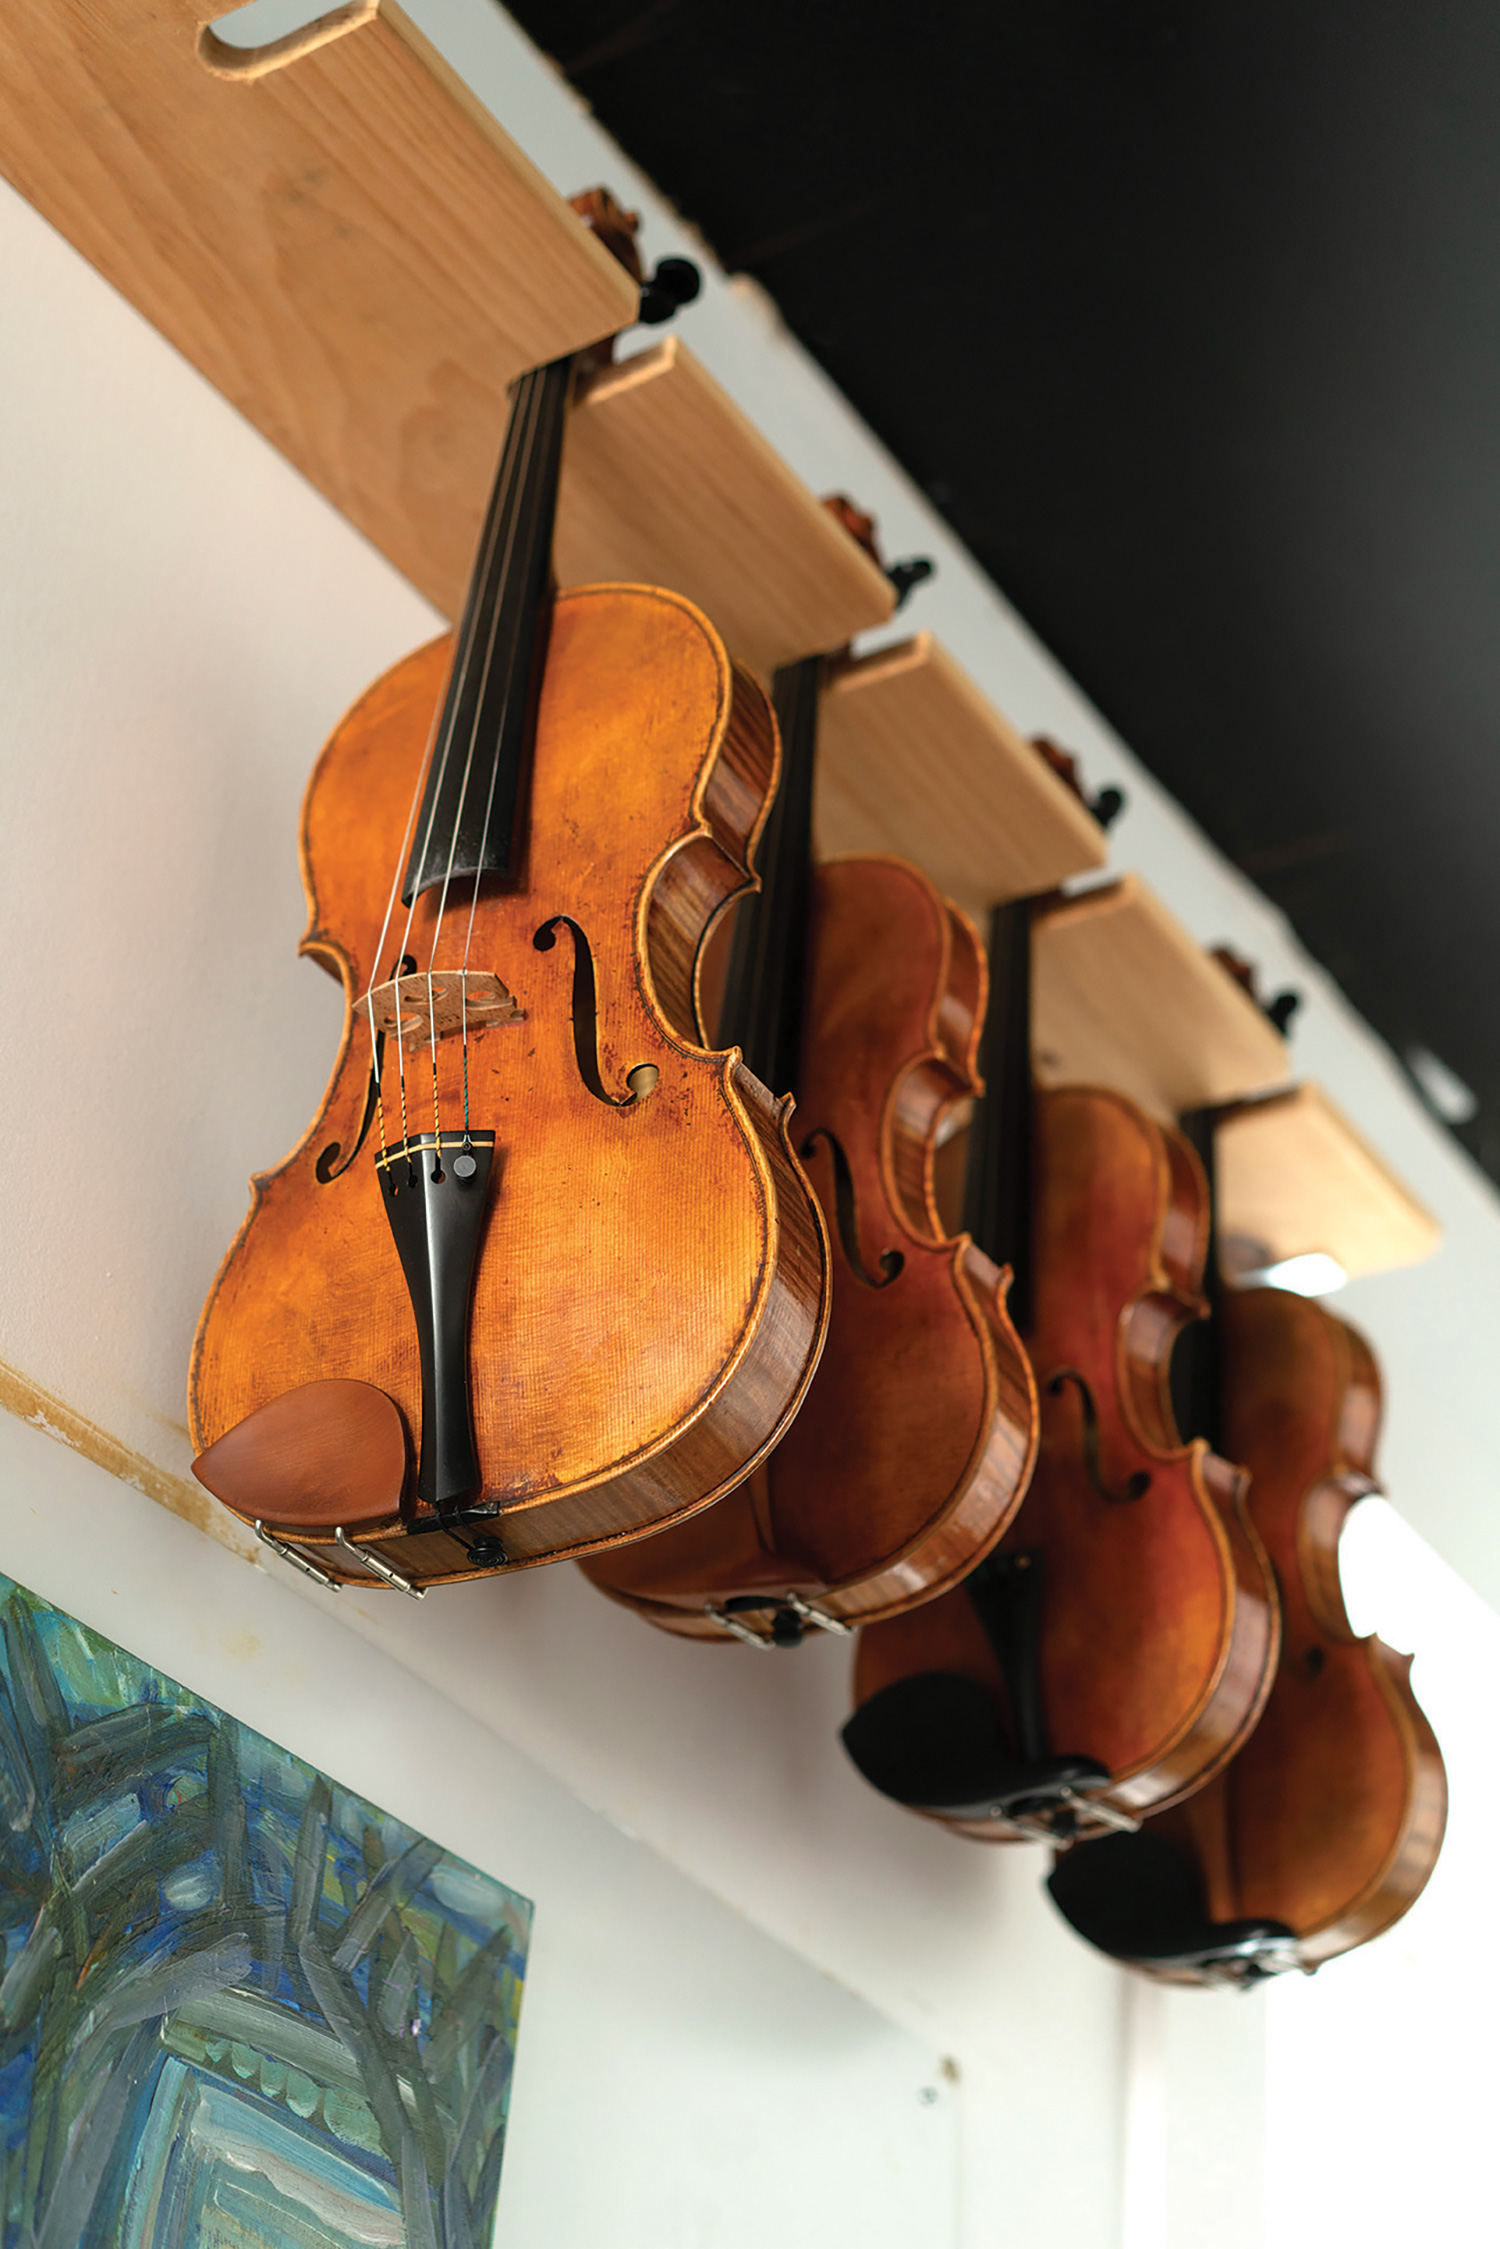 “I love the violin as an object,” says David Prentice in his workshop in downtown Flesherton.